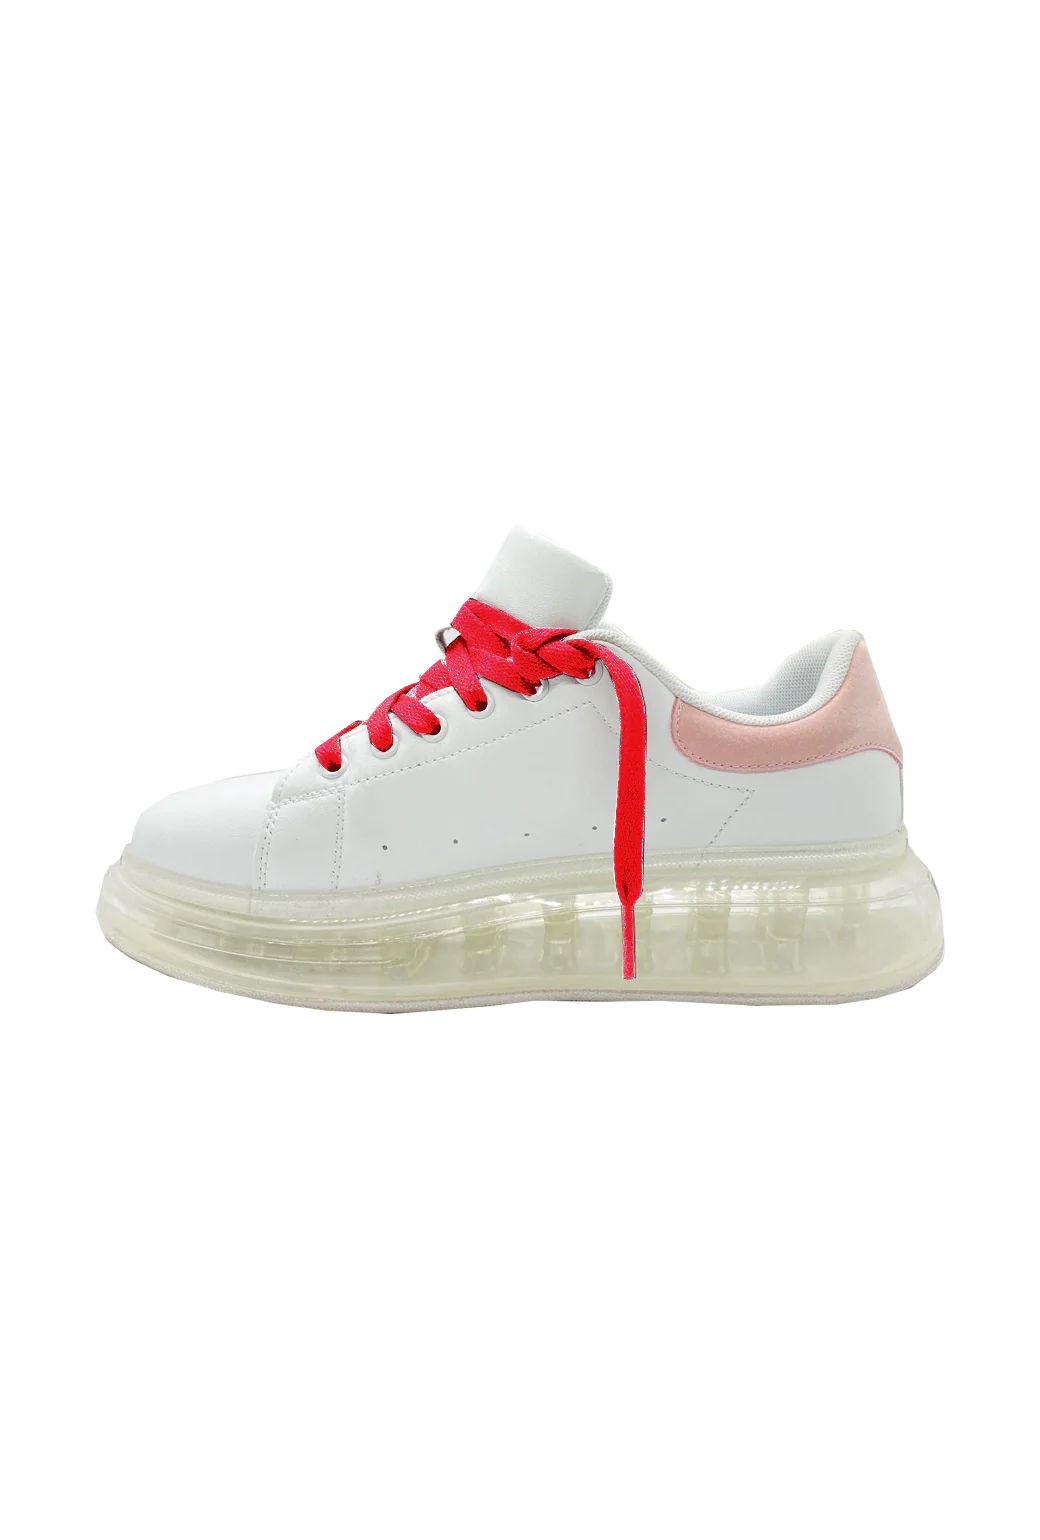 Air Mamas - White with Red Laces - Final Sale | Shop BURU